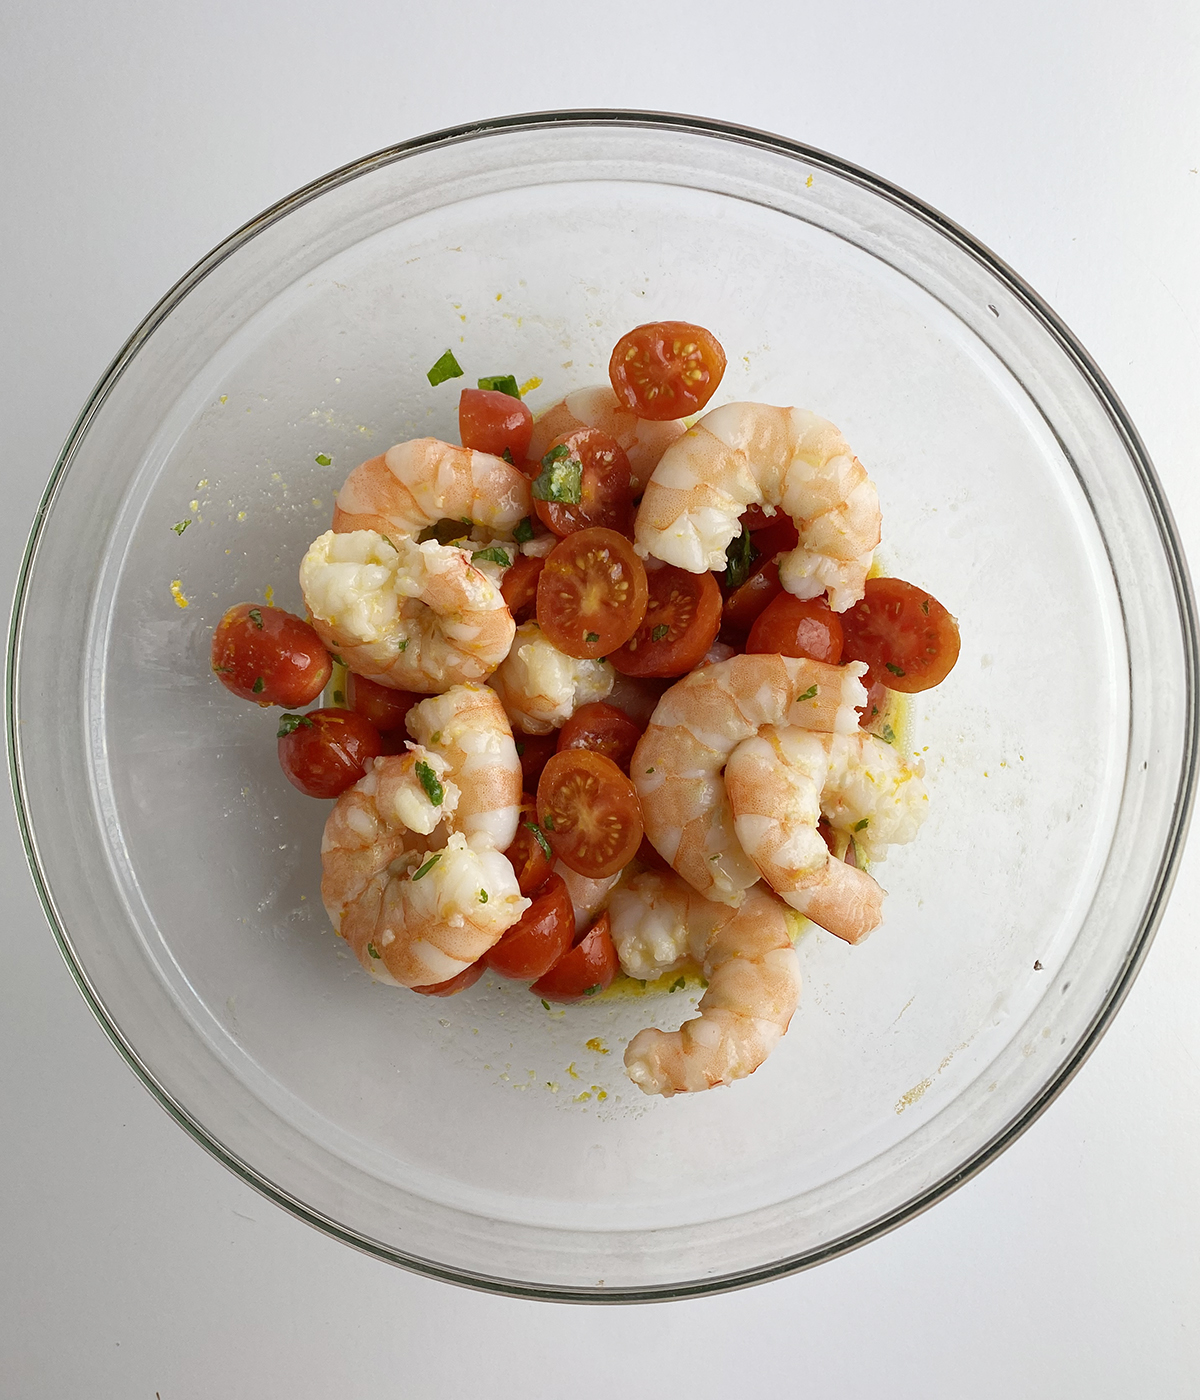 Shrimp, tomatoes and dressing tossed in a mixing bowl.